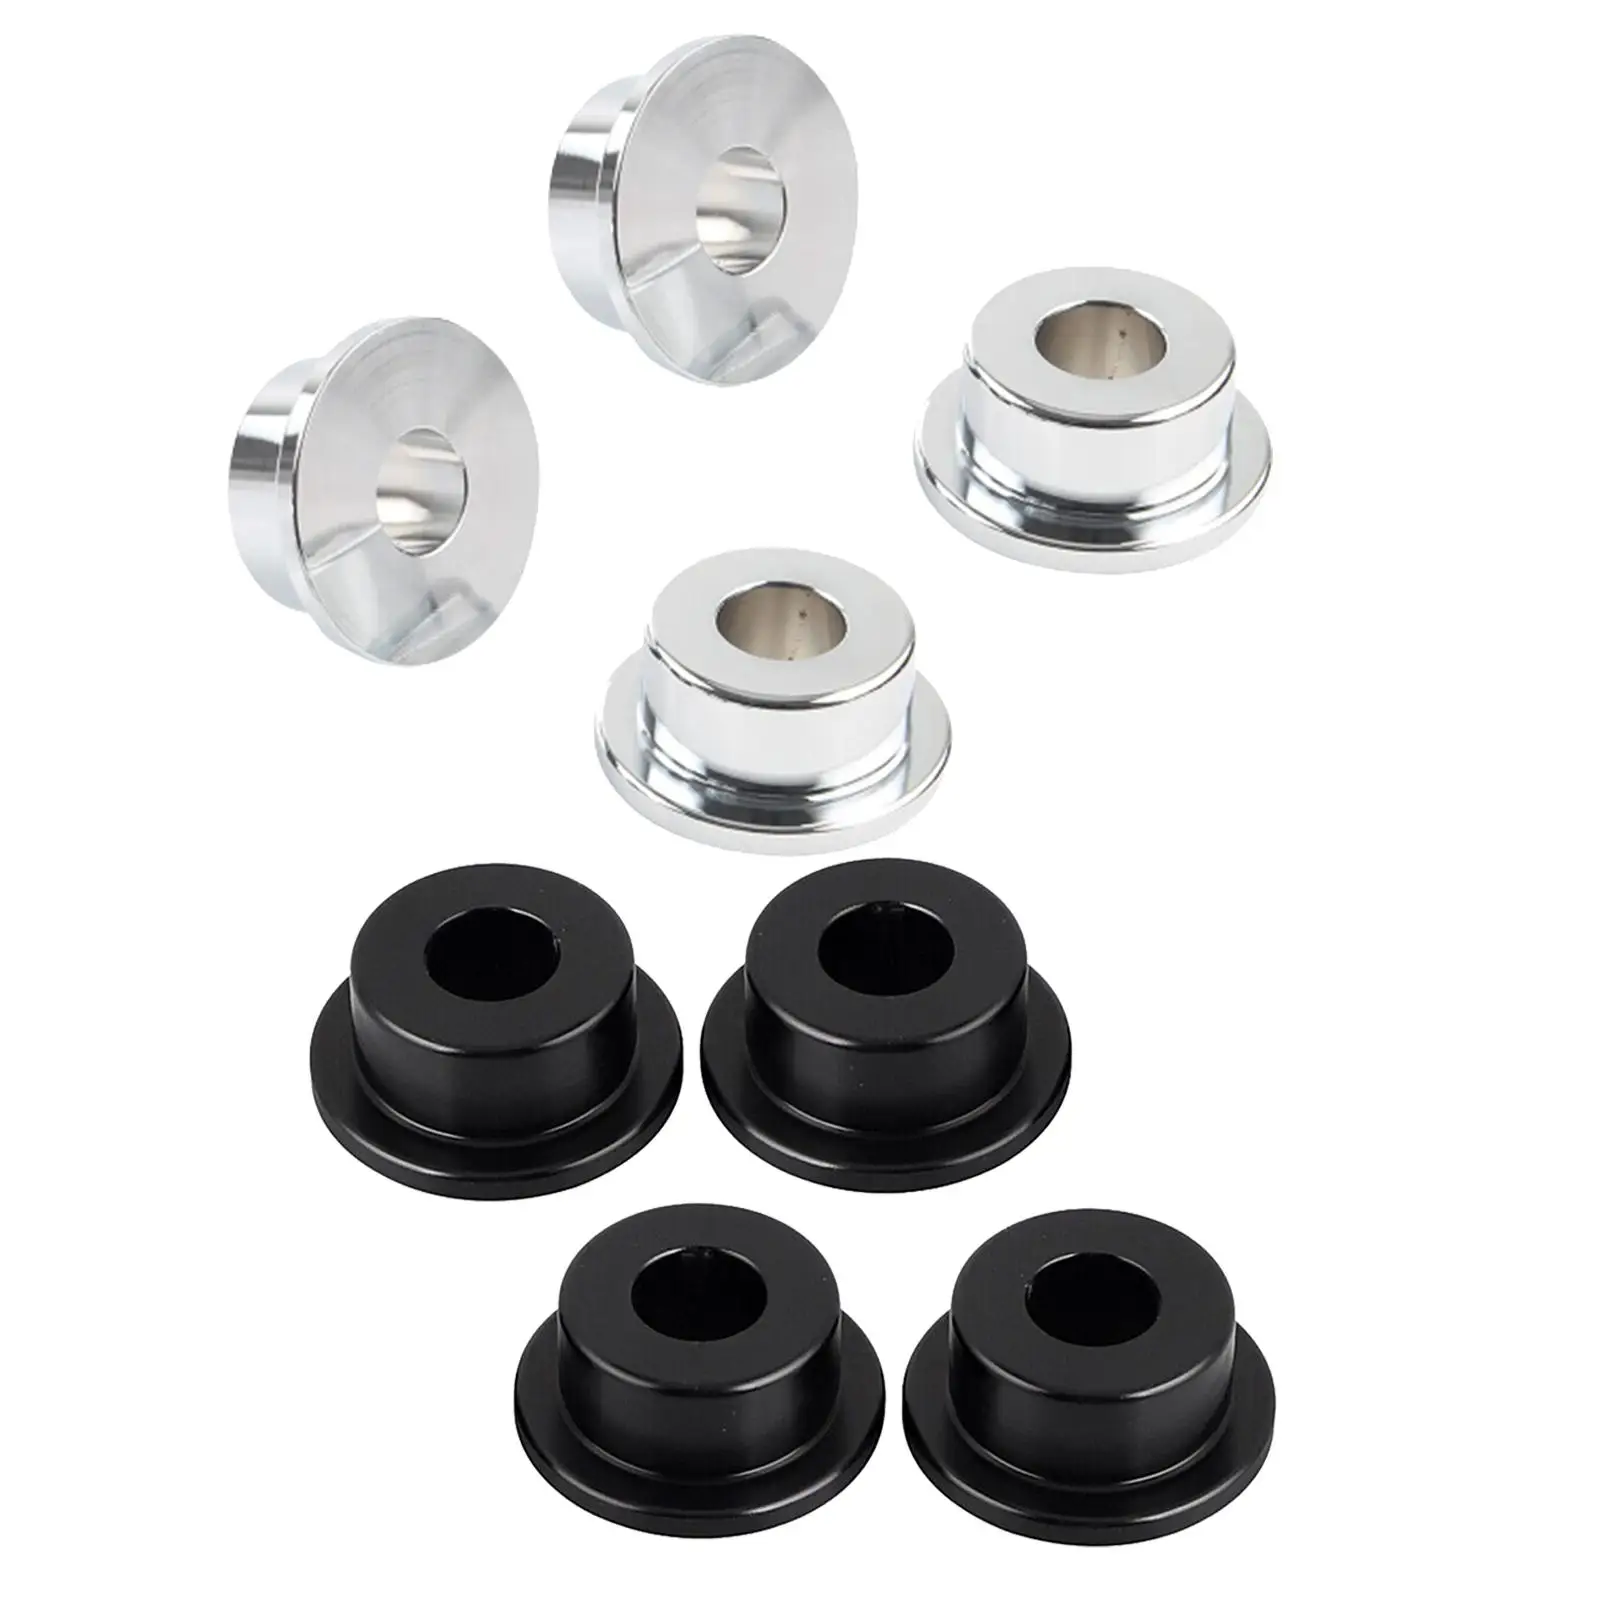 4 Pieces Handlebar Riser Bushings Mounts replacement Harley Sportster FX Softail Deuce Models Fine Surface Processing